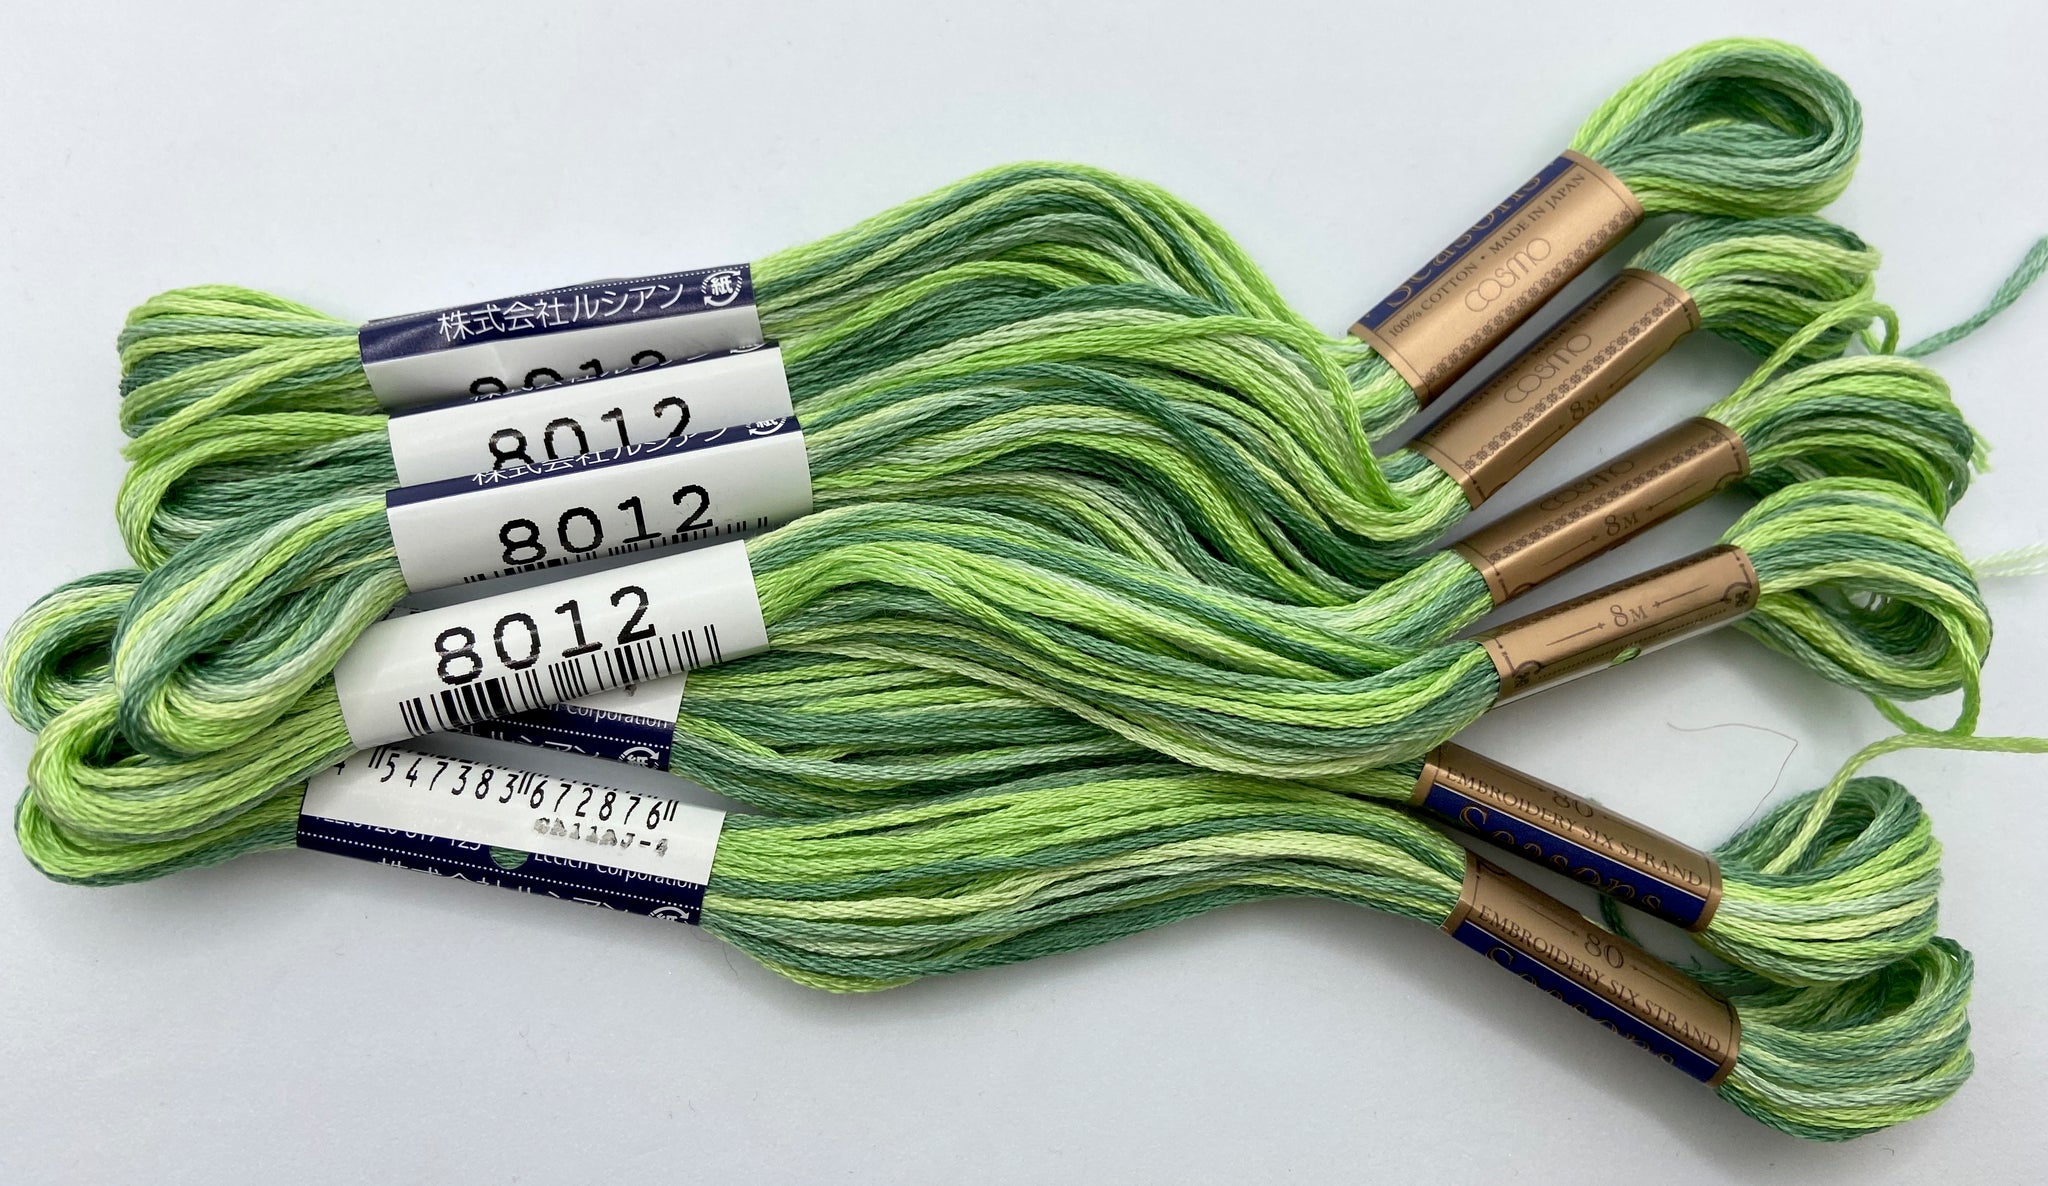 Hand Embroidery Floss - Cosmo Seasons Variegated #8037